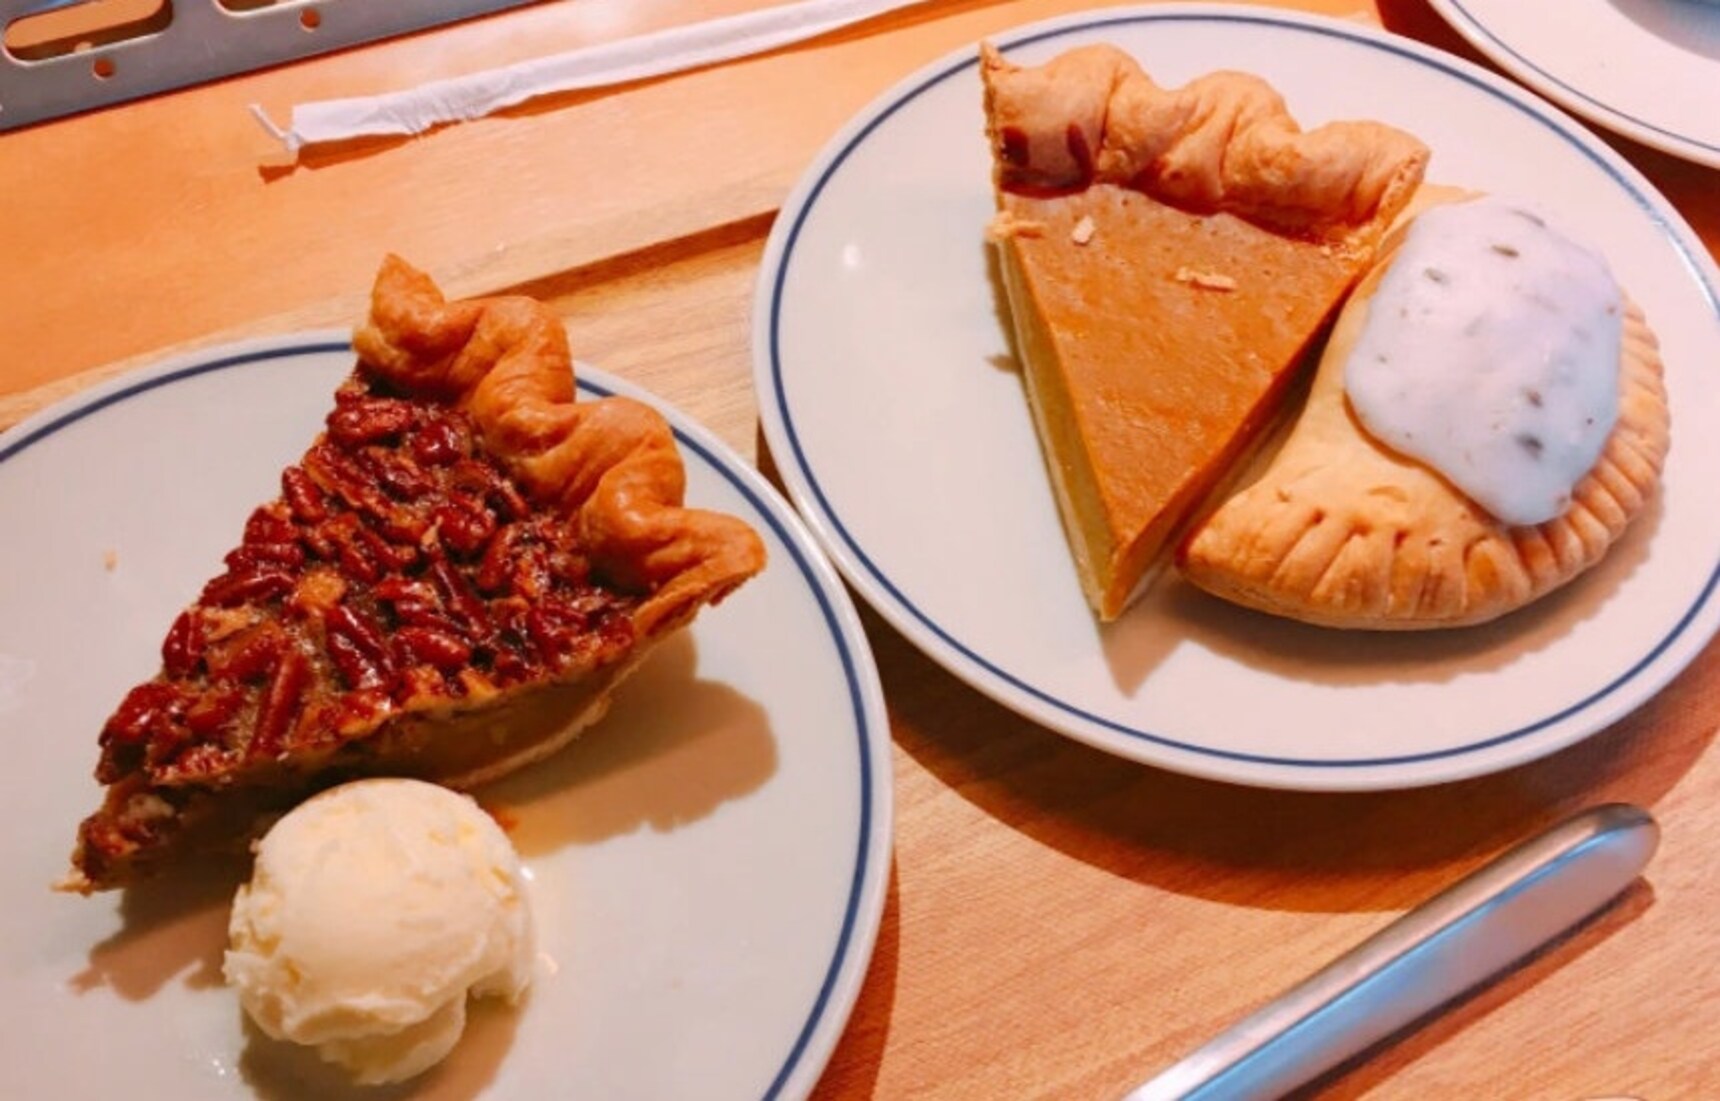 Shove Your Pie Hole With All-You-Can-Eat Pie